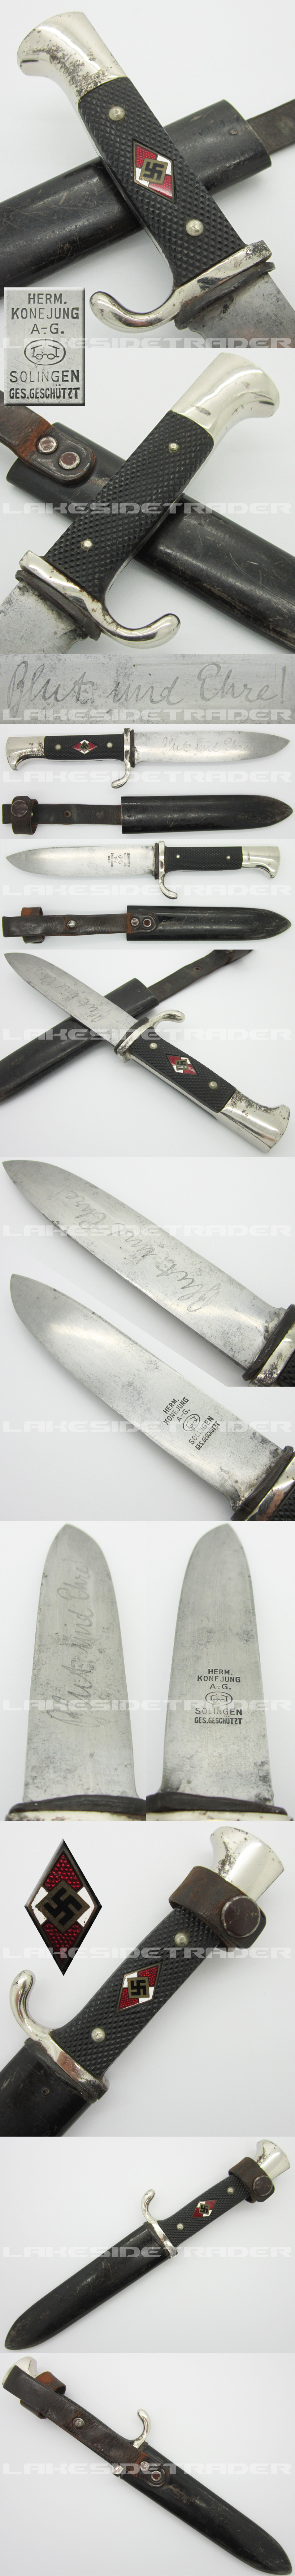 Early Hitler Youth Knife by Herm. Konejung